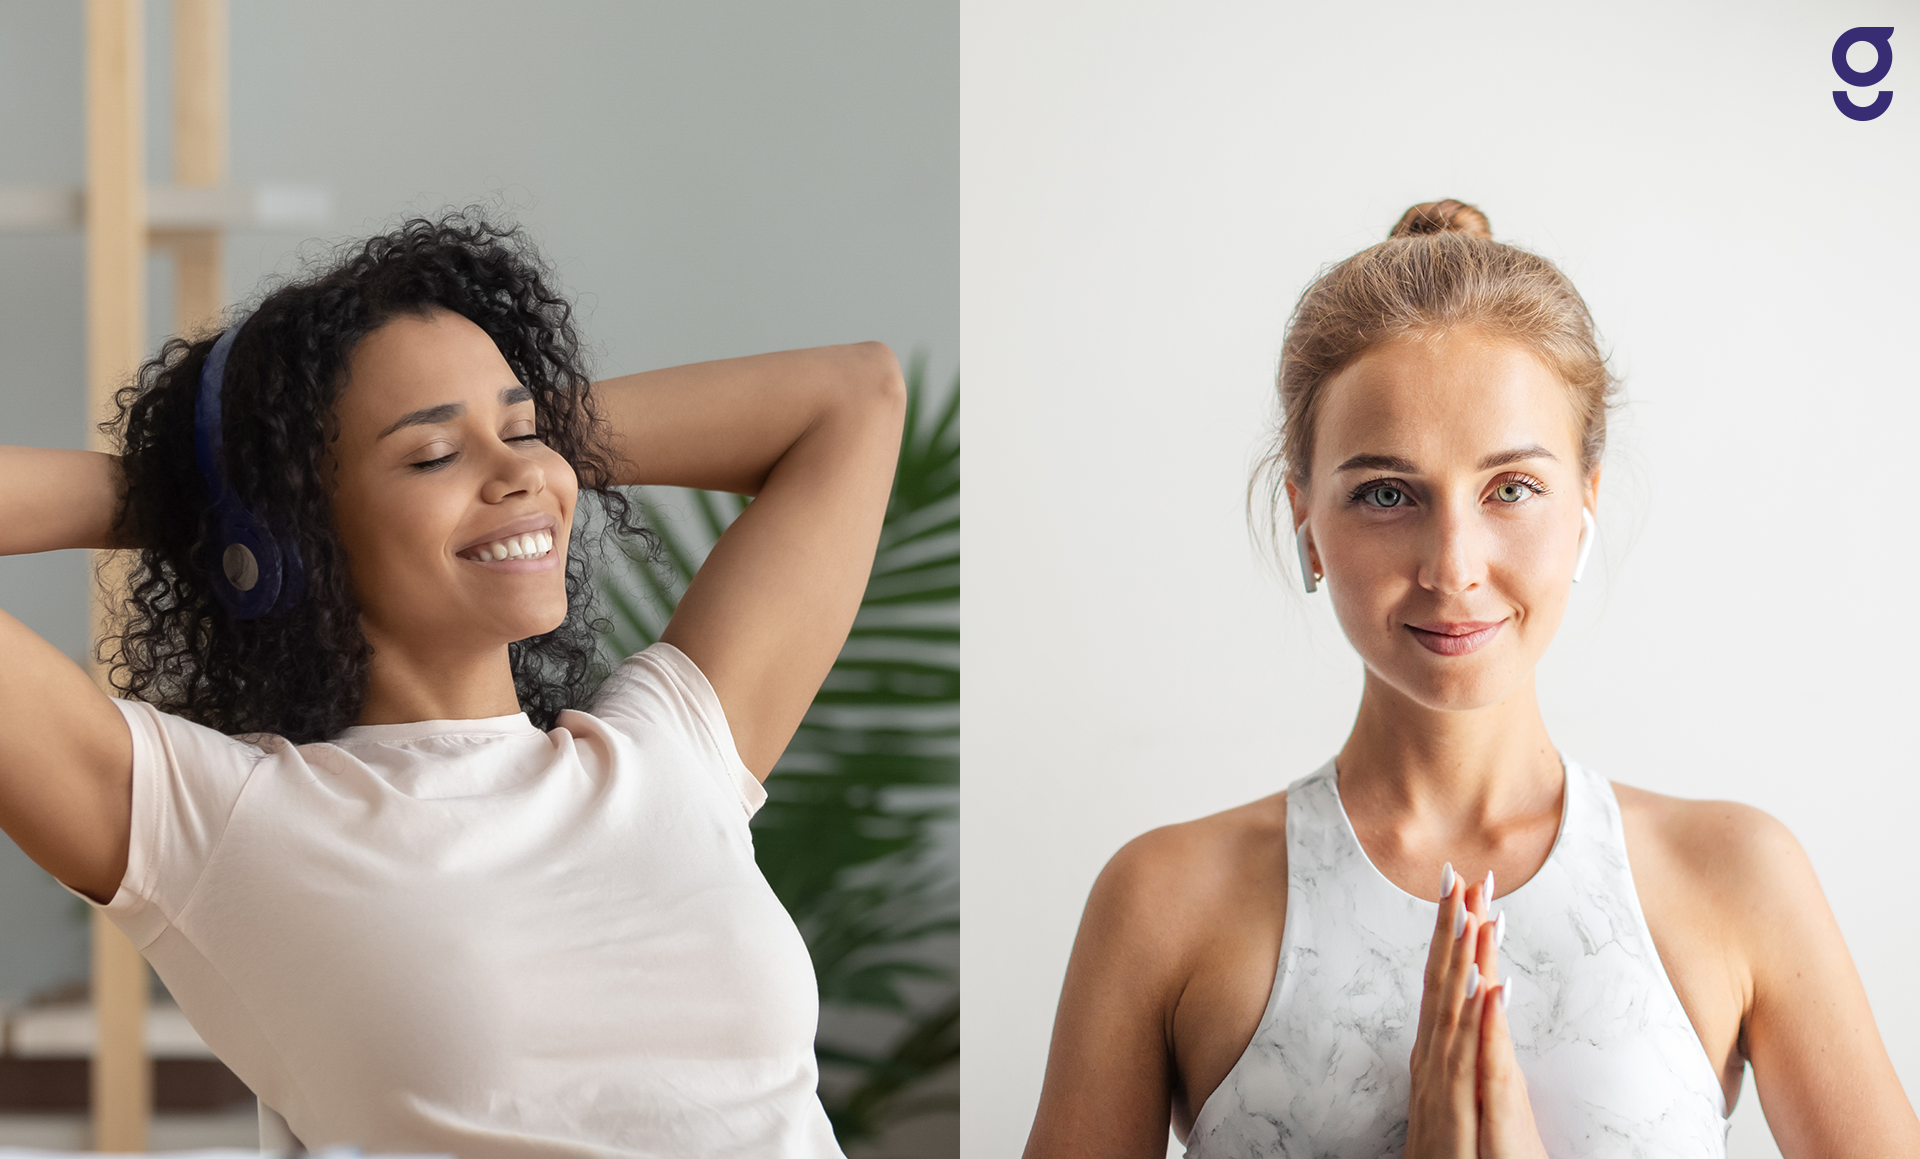 Two Proven Stress Relievers: Progressive Muscle Relaxation and Guided Imagery Meditation